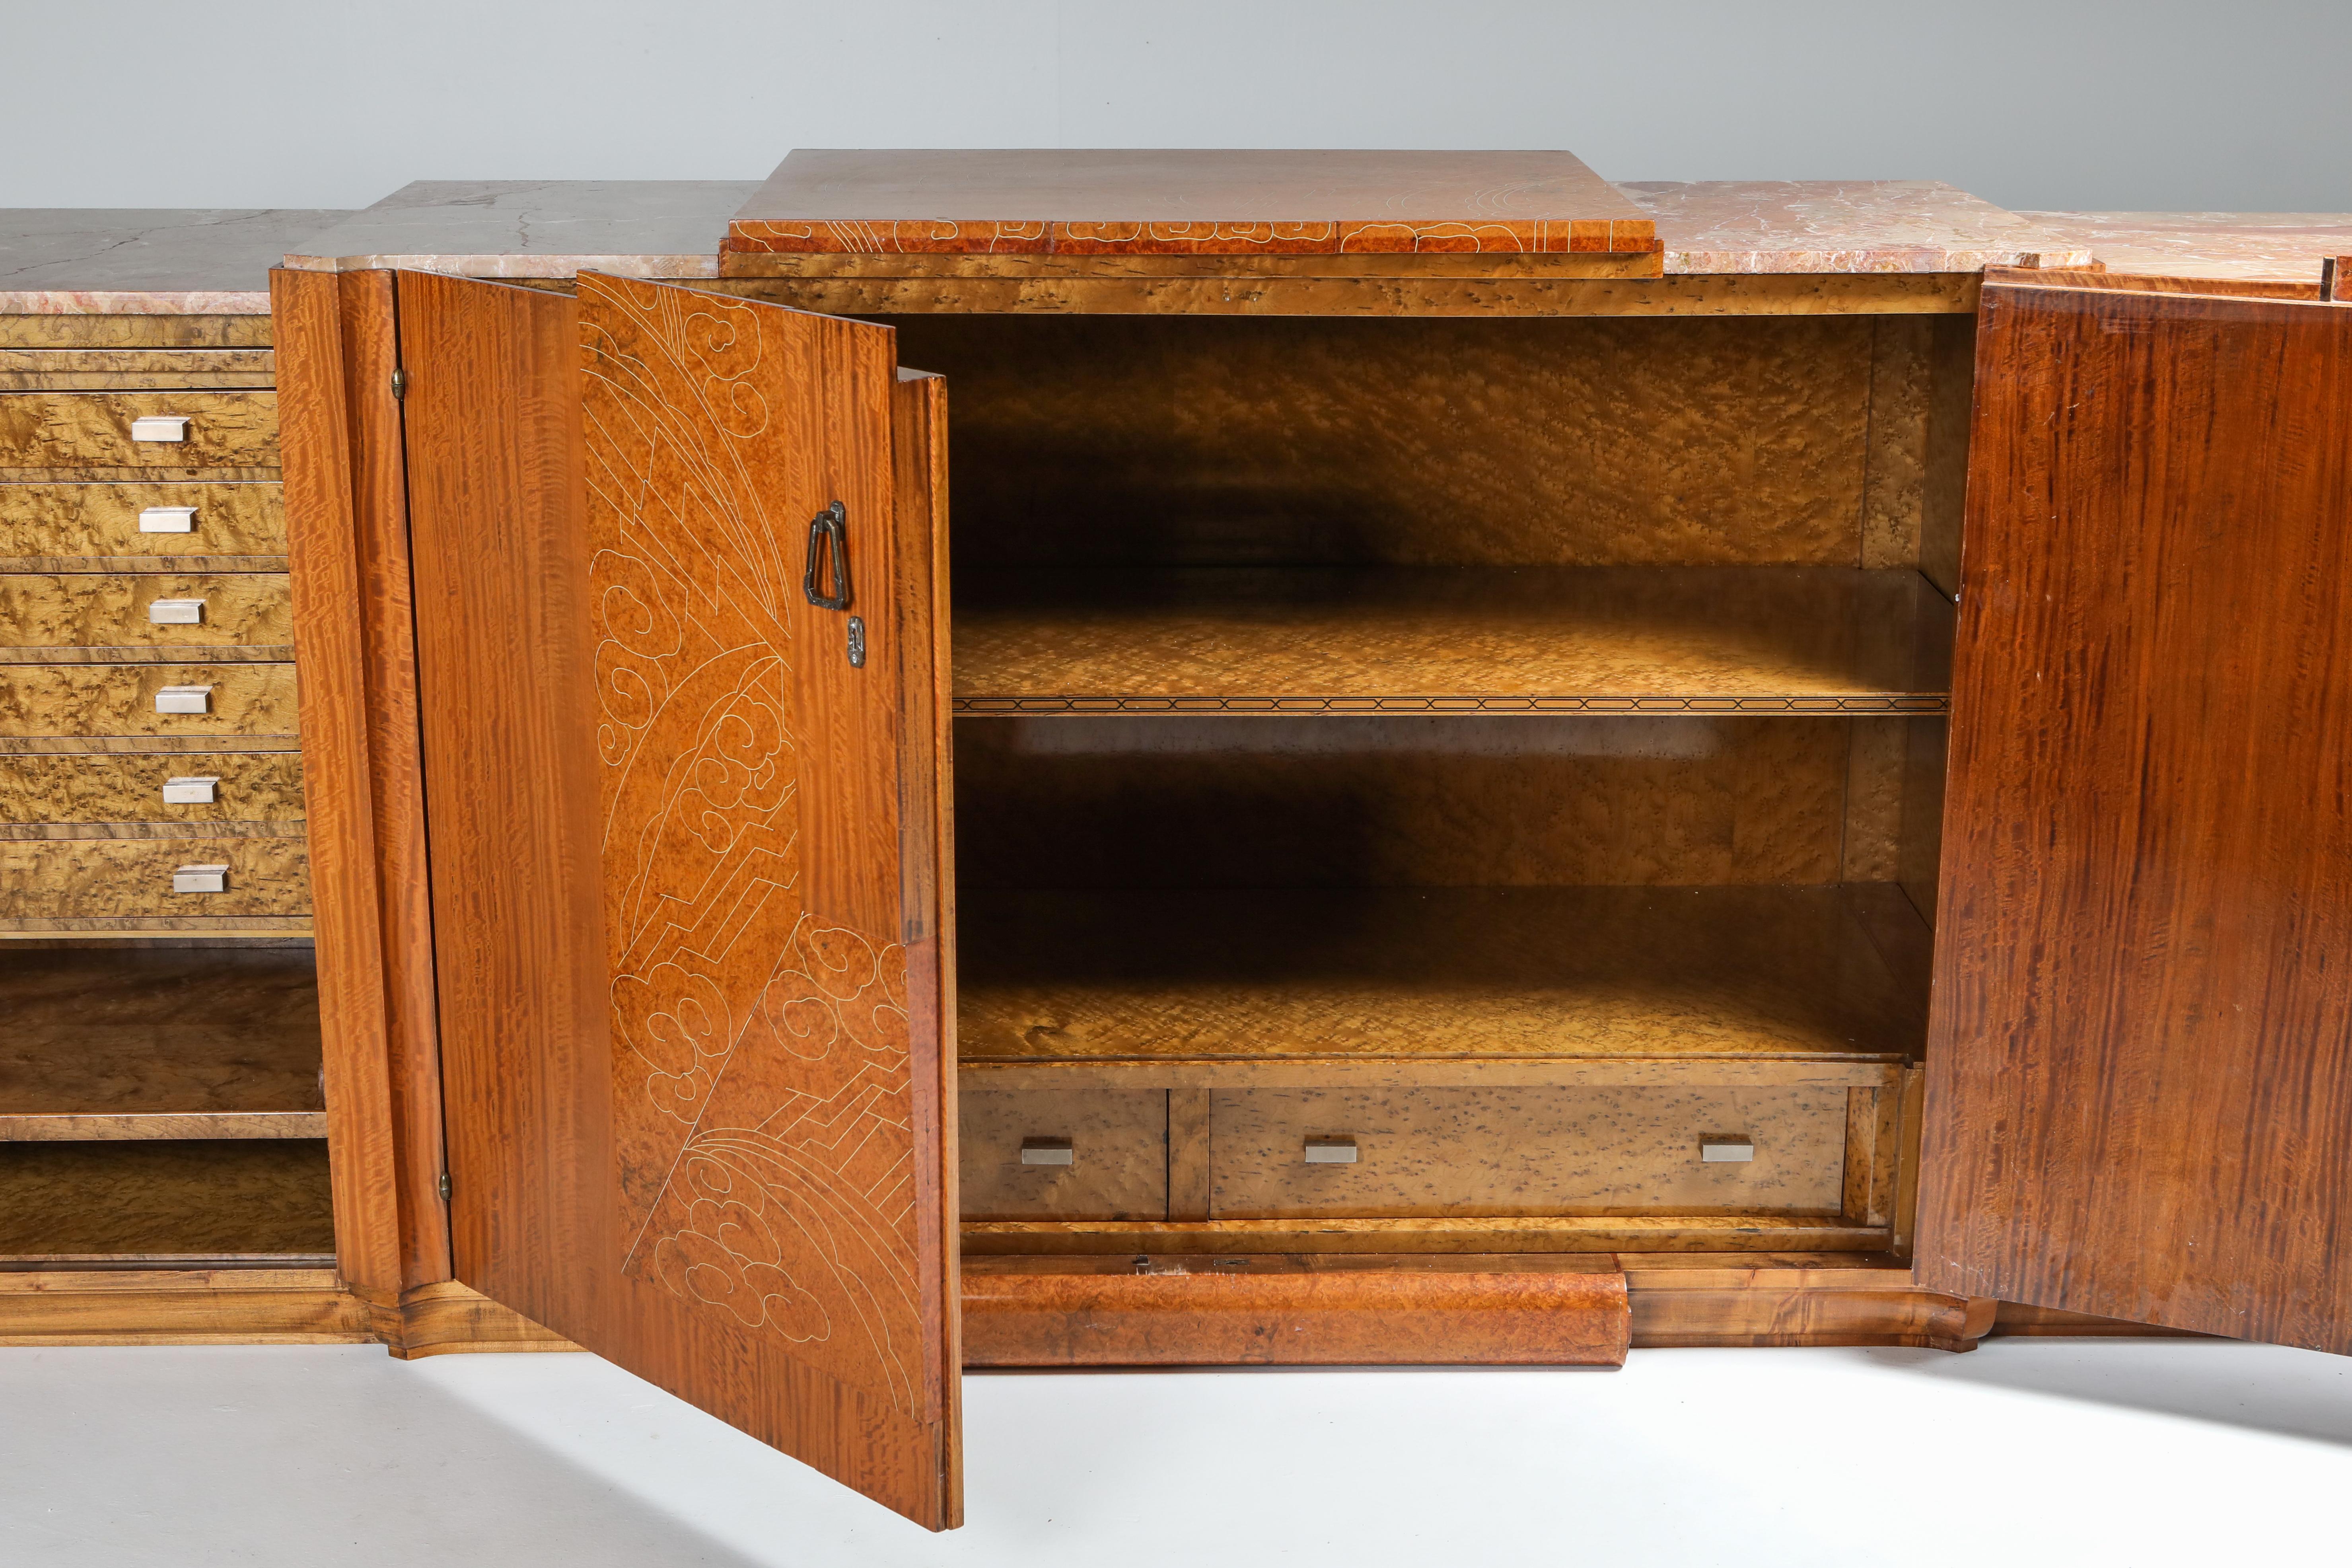 Art Deco High-End Credenza, Mahogany, Burl, Loupe D'amboine and Marble, 1930's For Sale 10